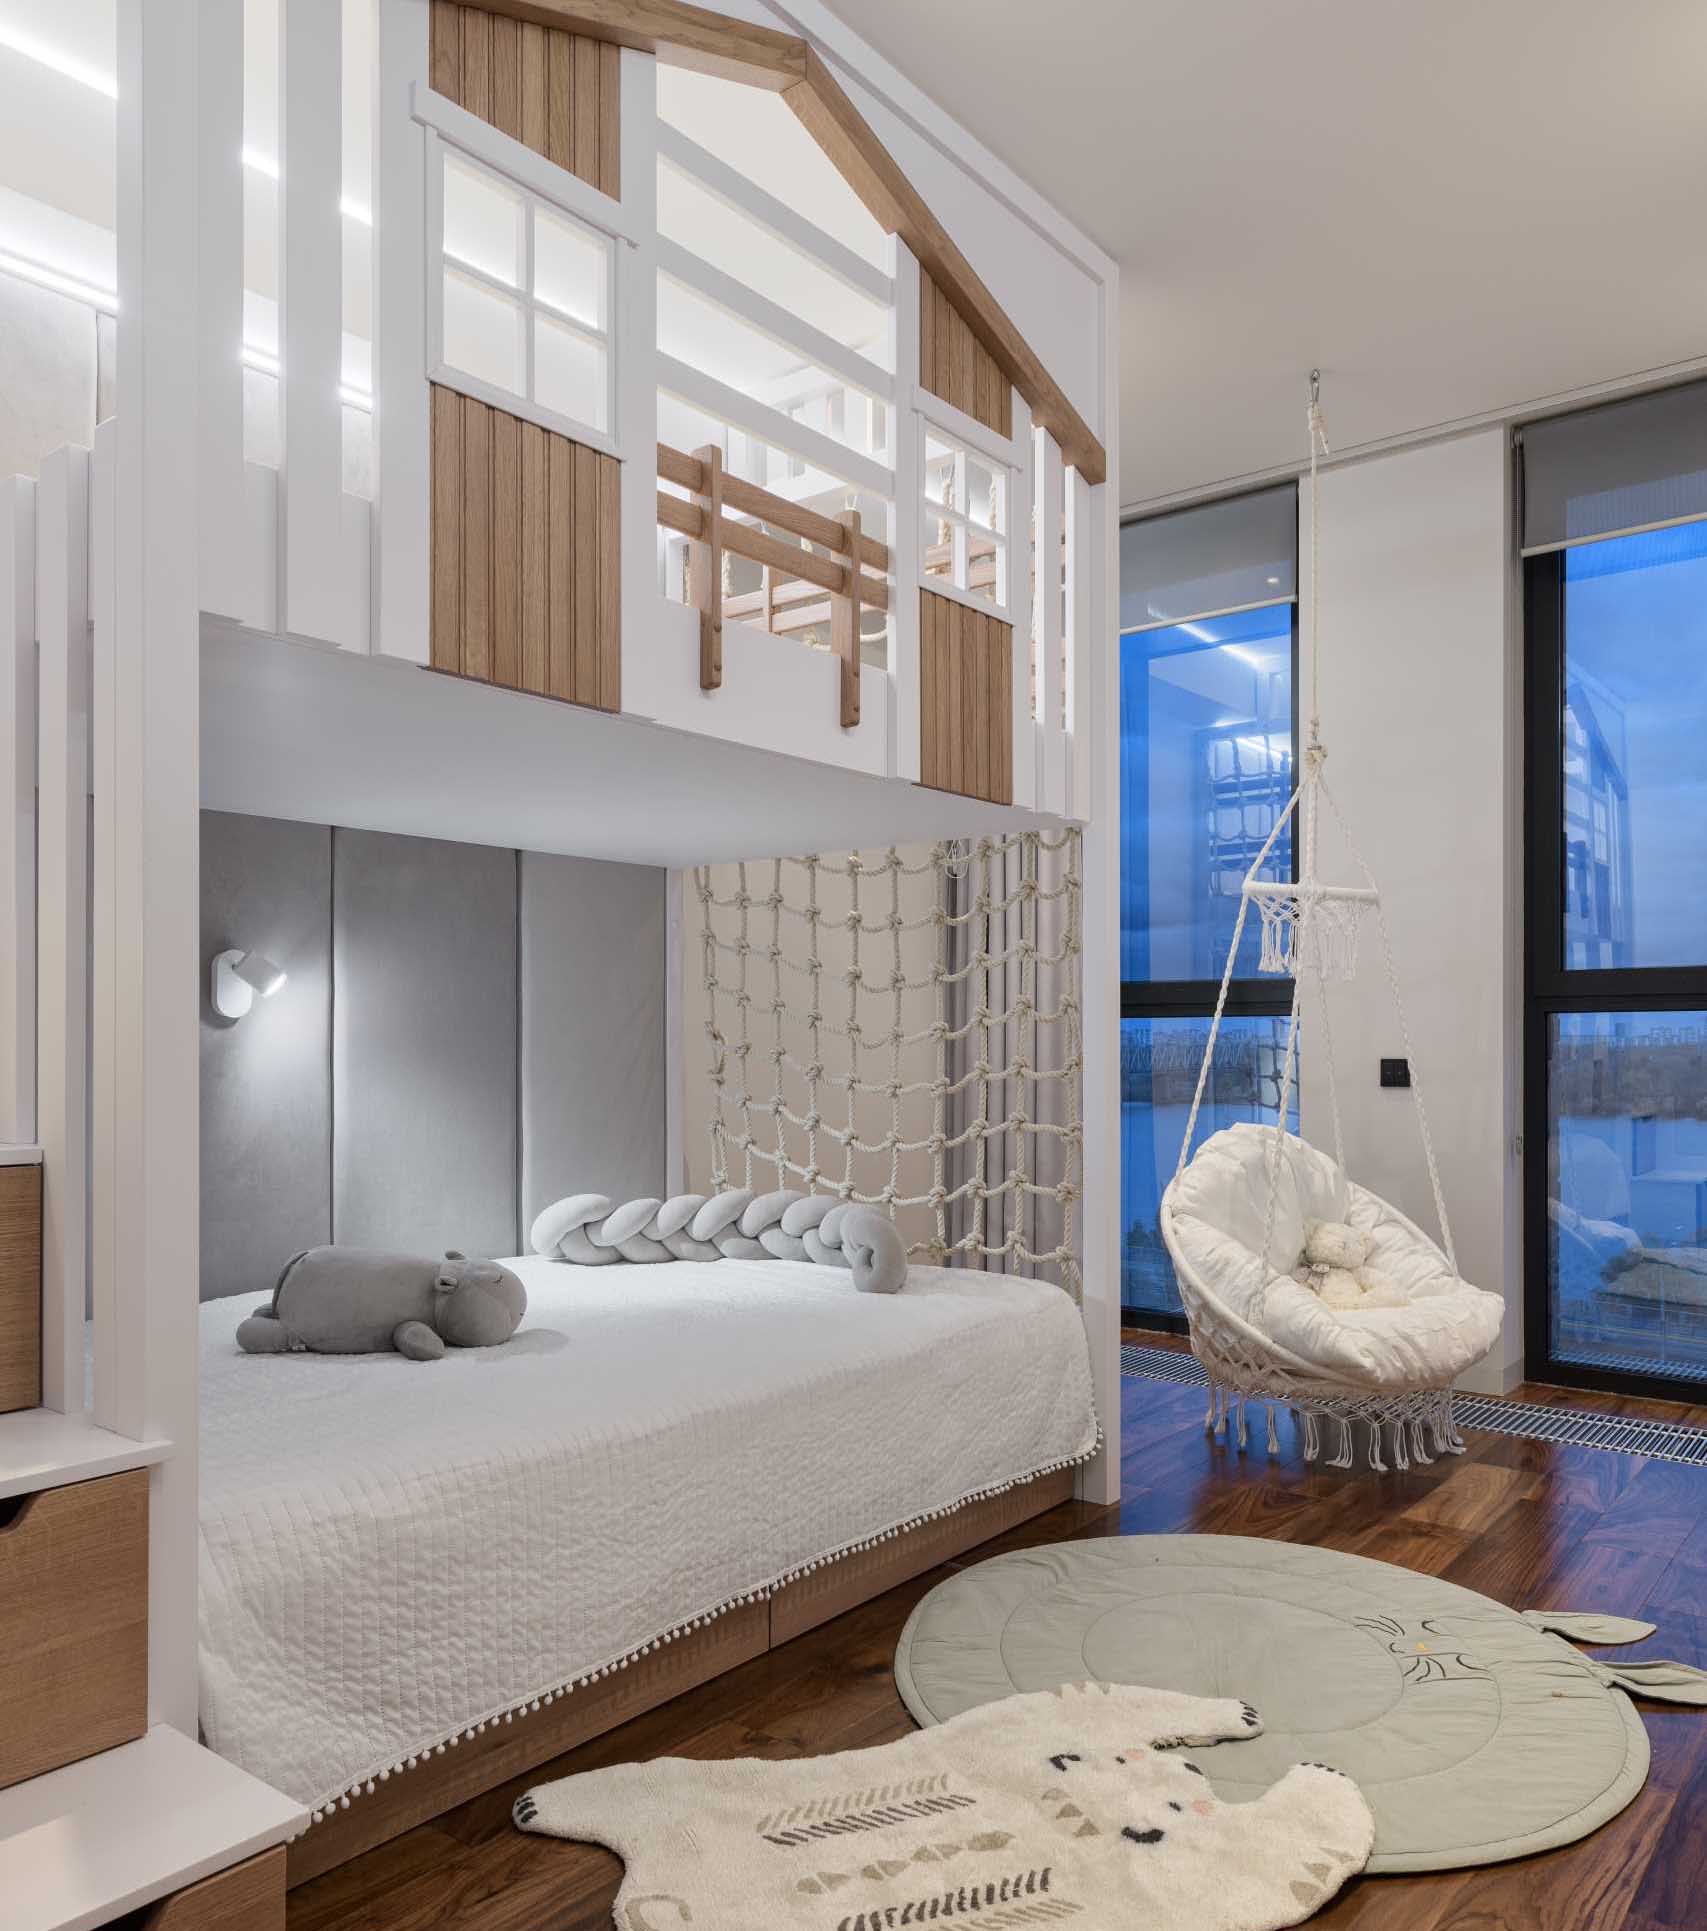 This modern kids bedroom has been designed with a double-story bed, the lower dedicated to the sleeping section, while the upper is a play area. 